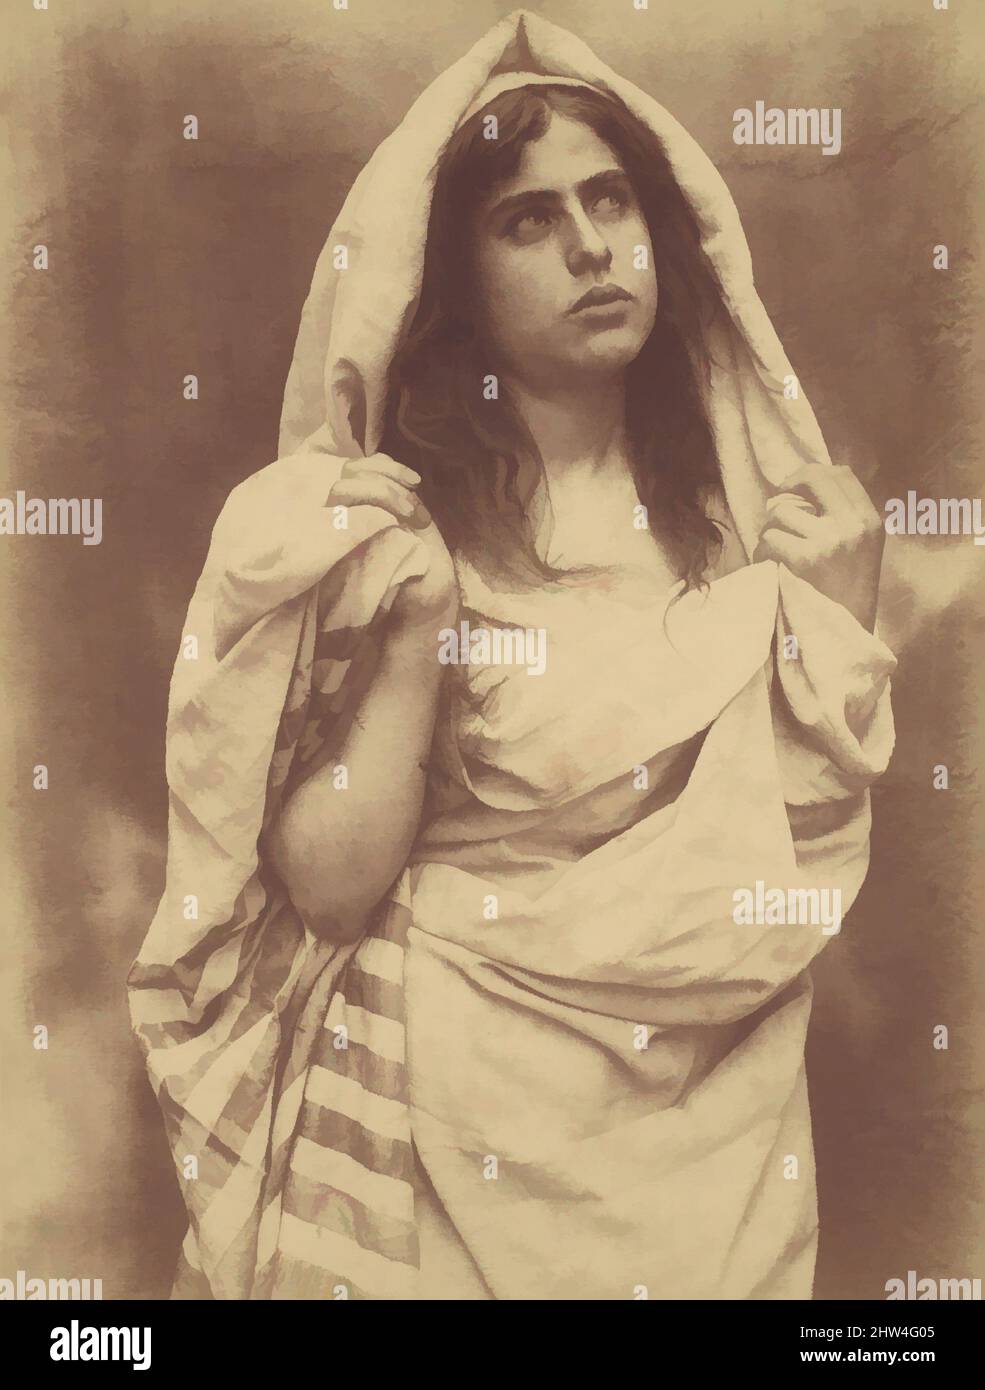 Art inspired by Young Girl Wrapped in Cloth, Sicily, Italy, 1890s–1900s, Albumen silver print from glass negative, 21.7 x 16.3 cm. (8 9/16 x 6 7/16 in.), Photographs, Wilhelm von Gloeden (Italian, born Germany, 1886–1931, Classic works modernized by Artotop with a splash of modernity. Shapes, color and value, eye-catching visual impact on art. Emotions through freedom of artworks in a contemporary way. A timeless message pursuing a wildly creative new direction. Artists turning to the digital medium and creating the Artotop NFT Stock Photo